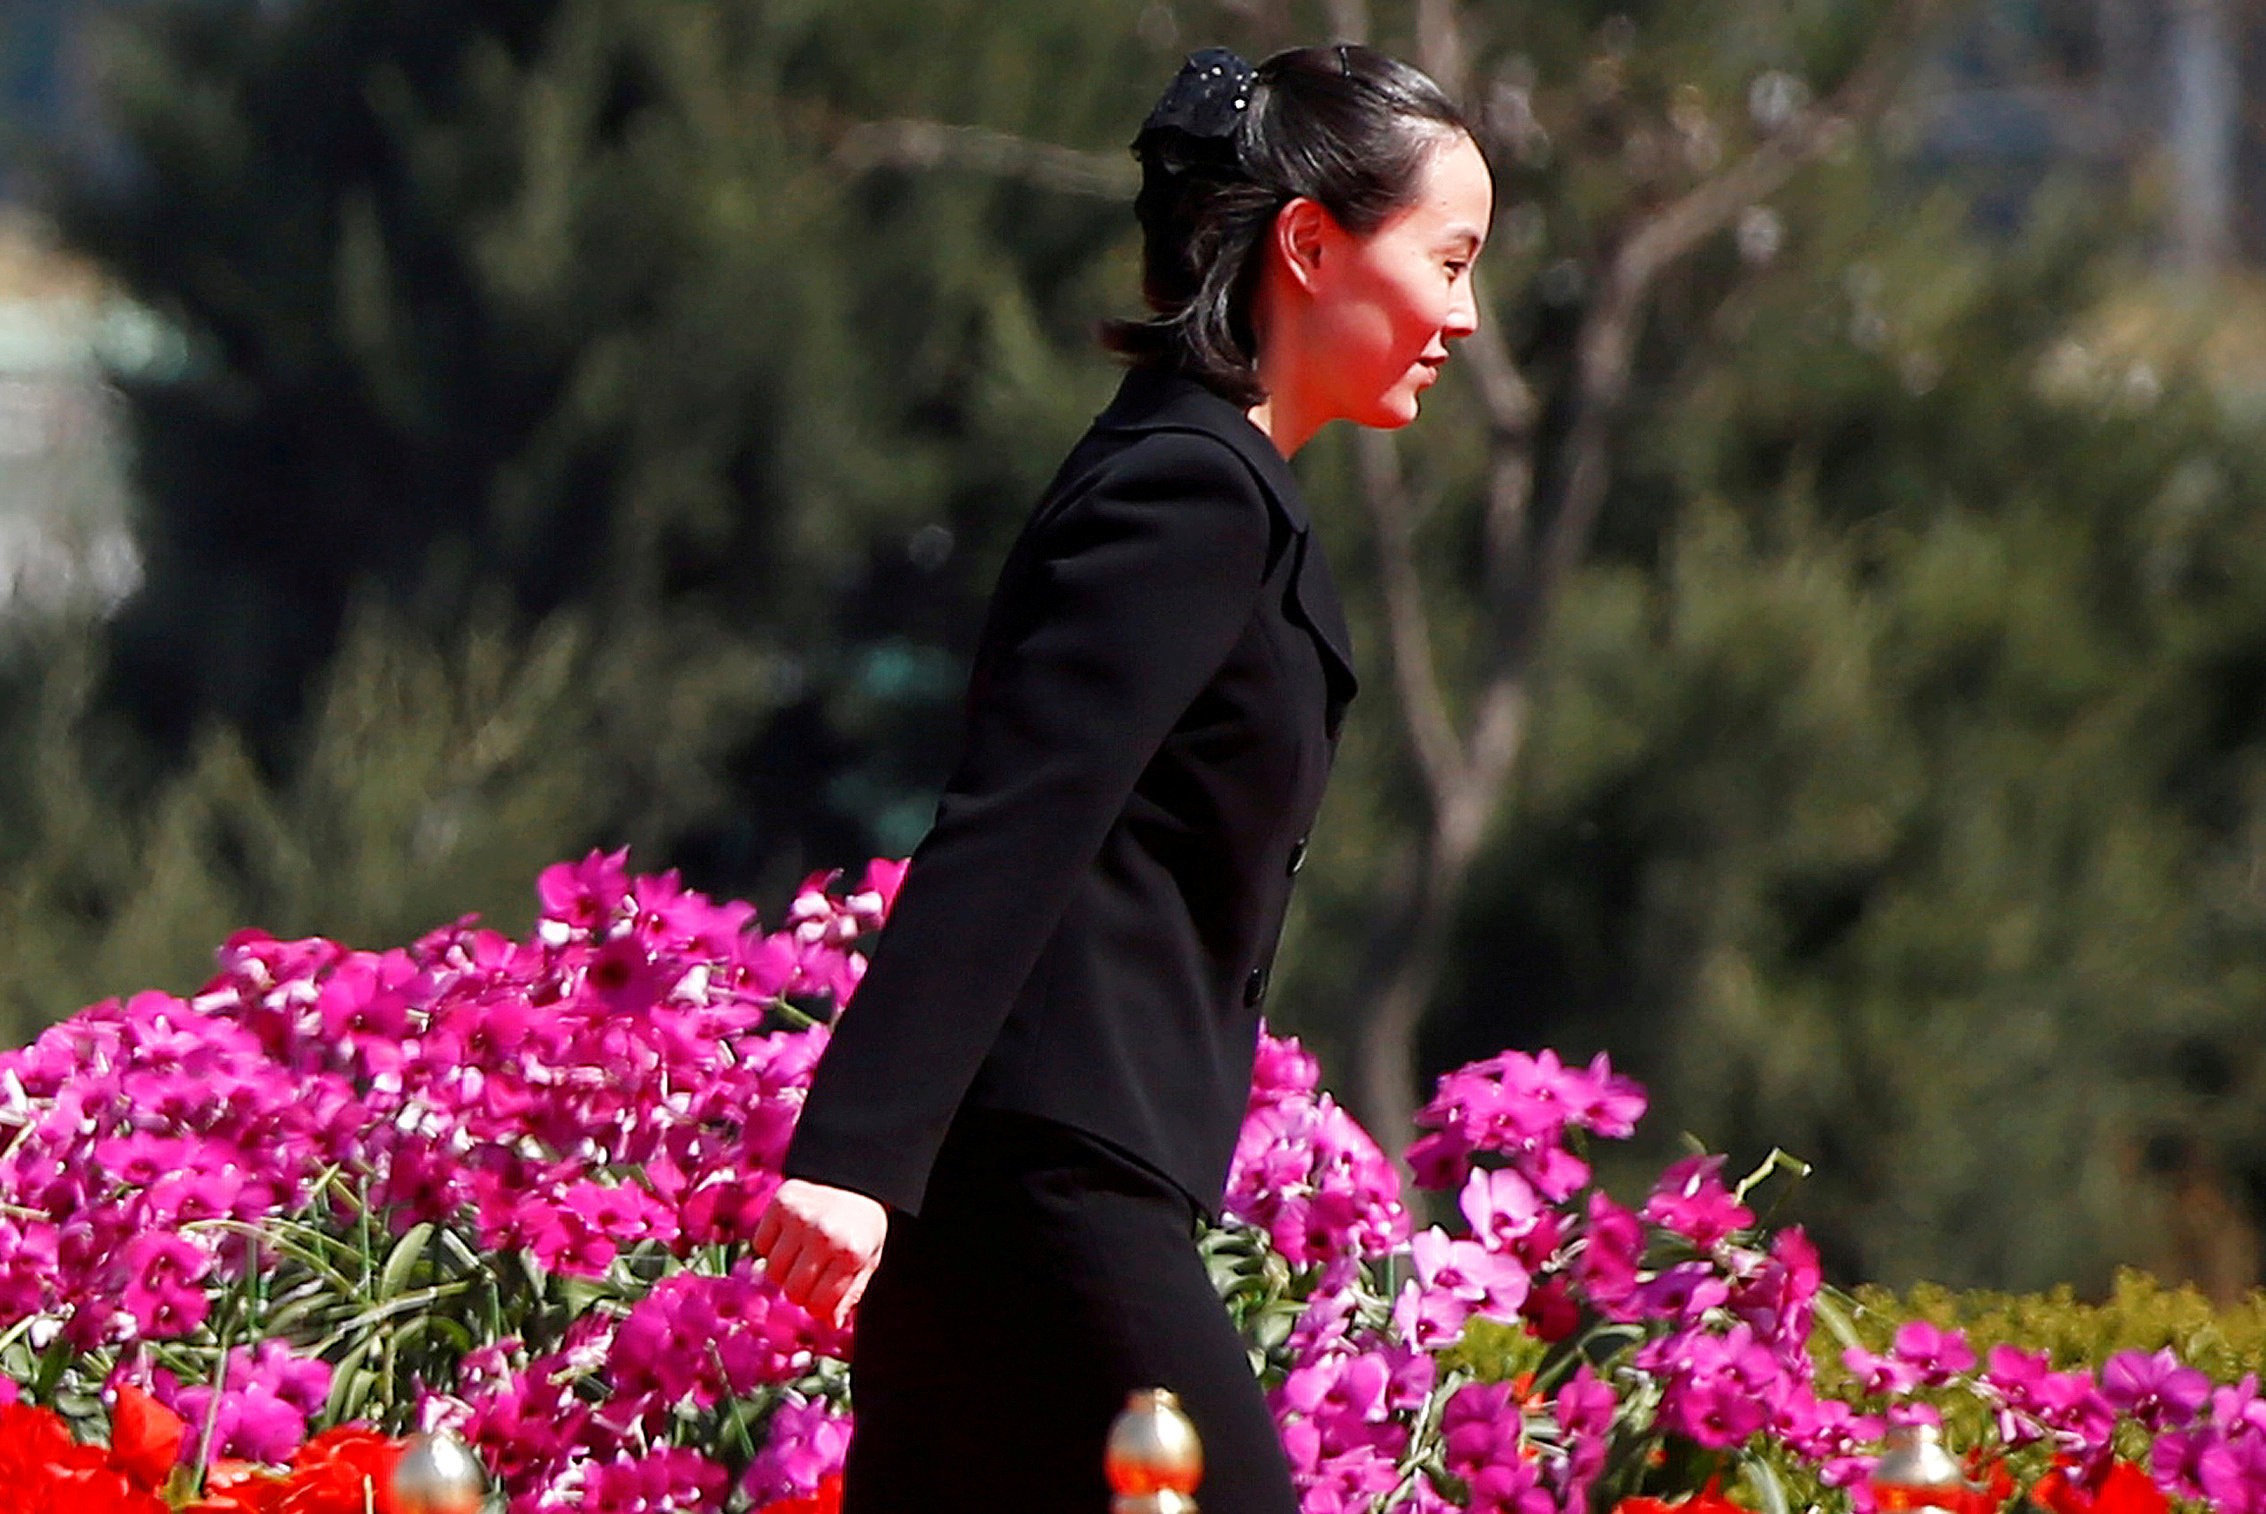 Kim Yo-jong first entered the public eye during one of North Korea’s darkest moments. Now she is back on stage for one of its brightest – helming Pyongyang’s Olympic charm offensive